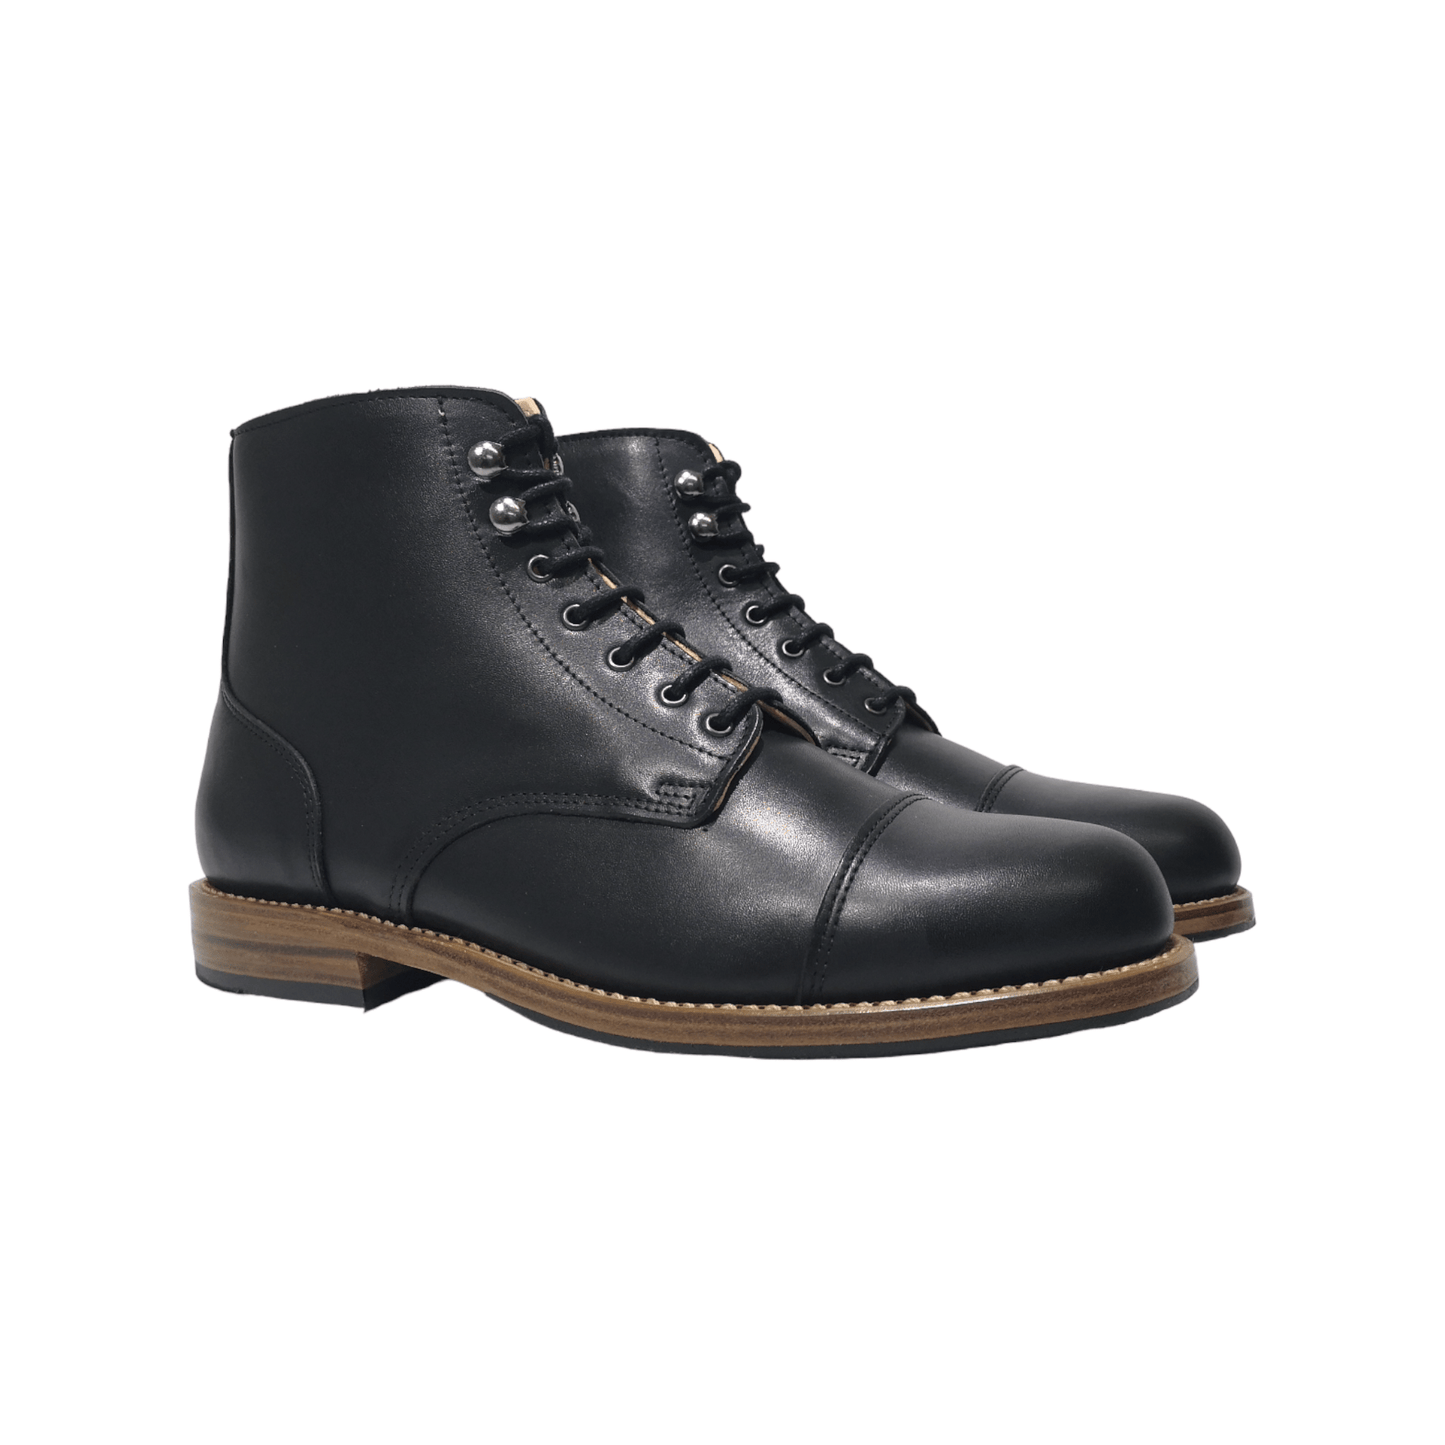 Tejo Premium Boots - OldMulla - Boots Store, Handmade By George Family